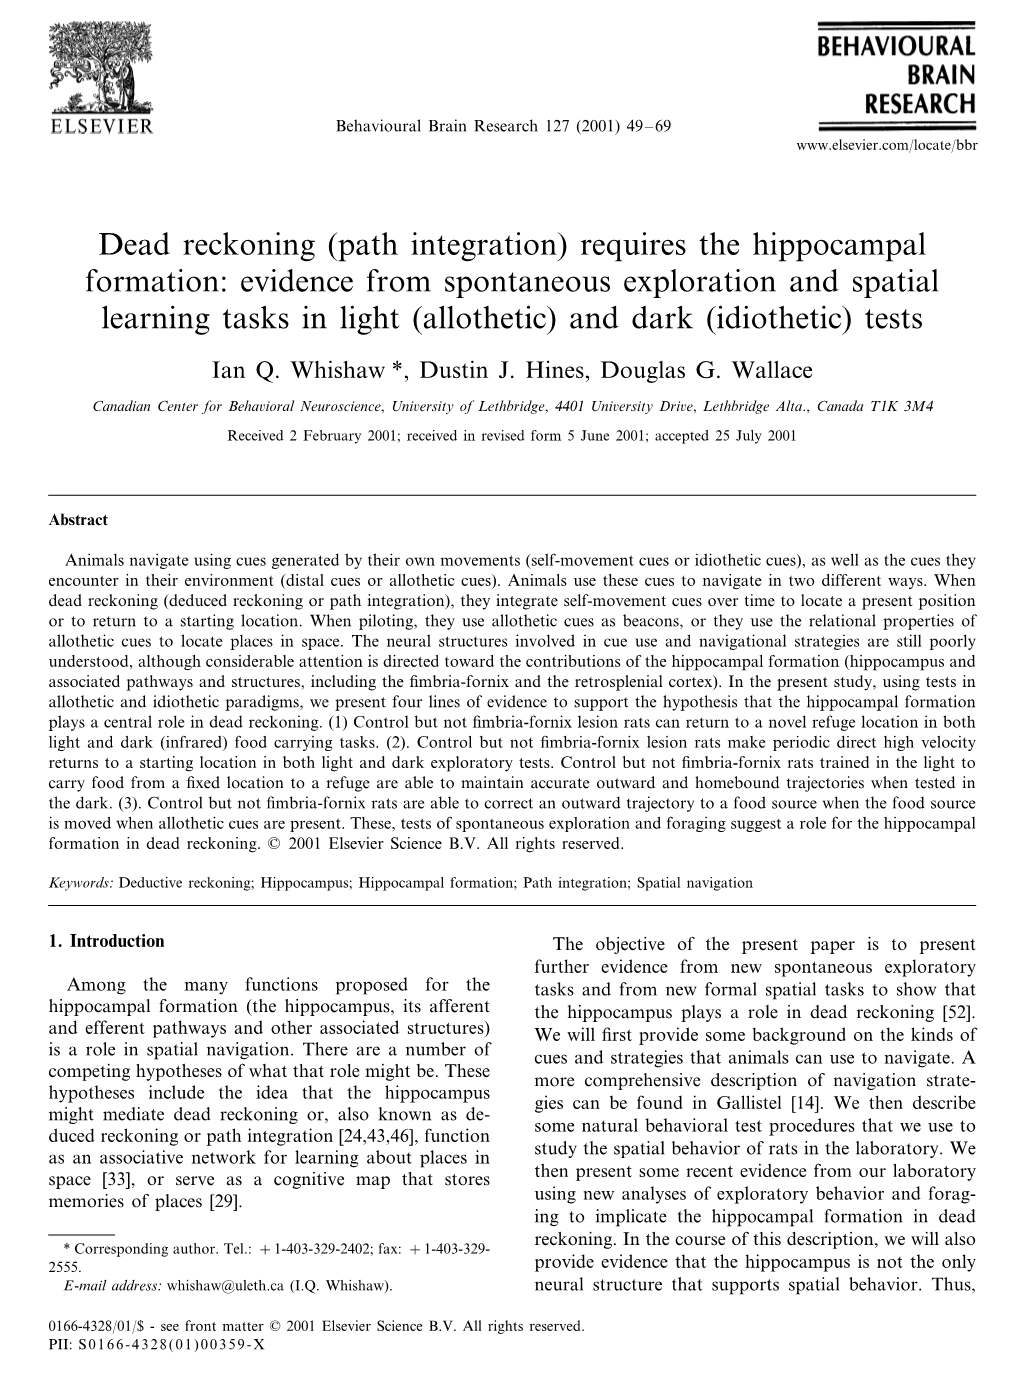 Dead Reckoning (Path Integration) Requires the Hippocampal Formation